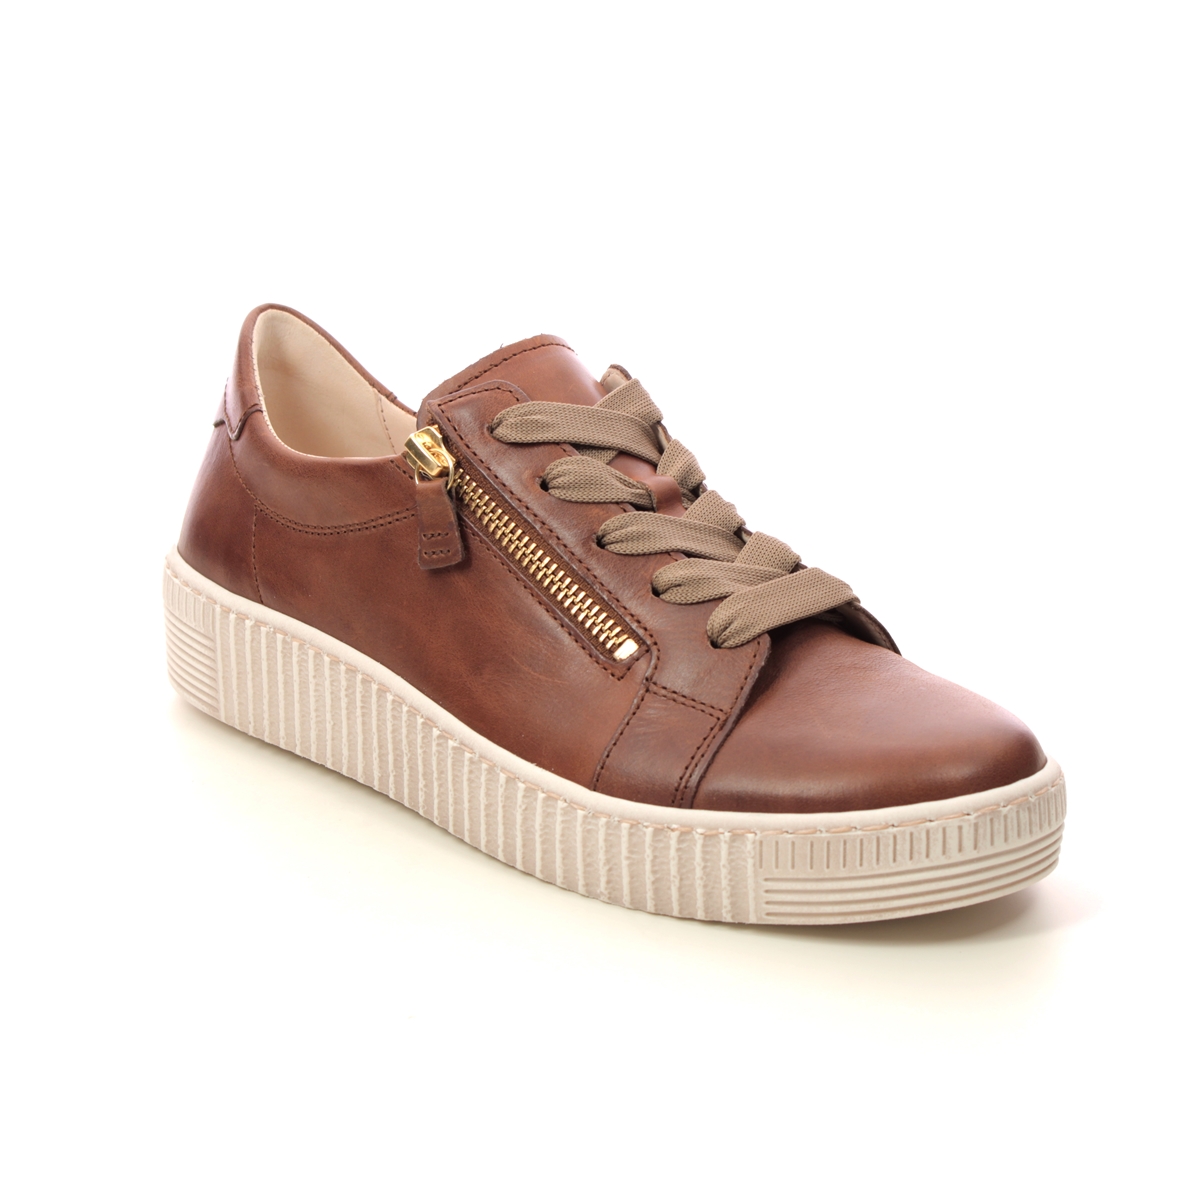 Gabor Wisdom Tan Leather Womens Trainers 93.334.24 In Size 7 In Plain Tan Leather  Womens Trainers In Soft Tan Leather Leather